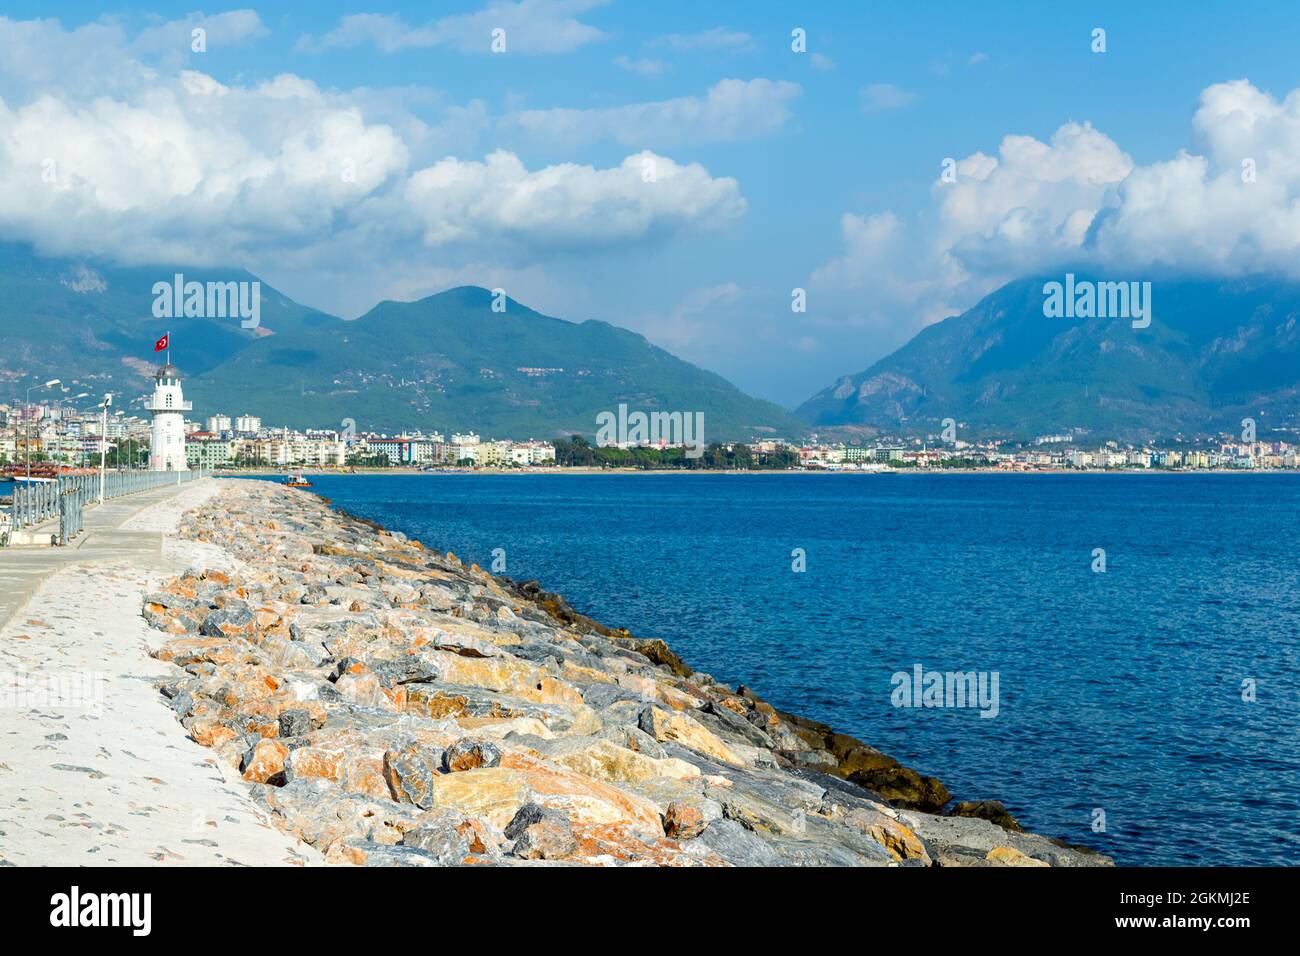 Road to a lighthouse in the scenery of  amazing sky, clouds and mountains in the city of Alanya, Turkey. Stock Photo